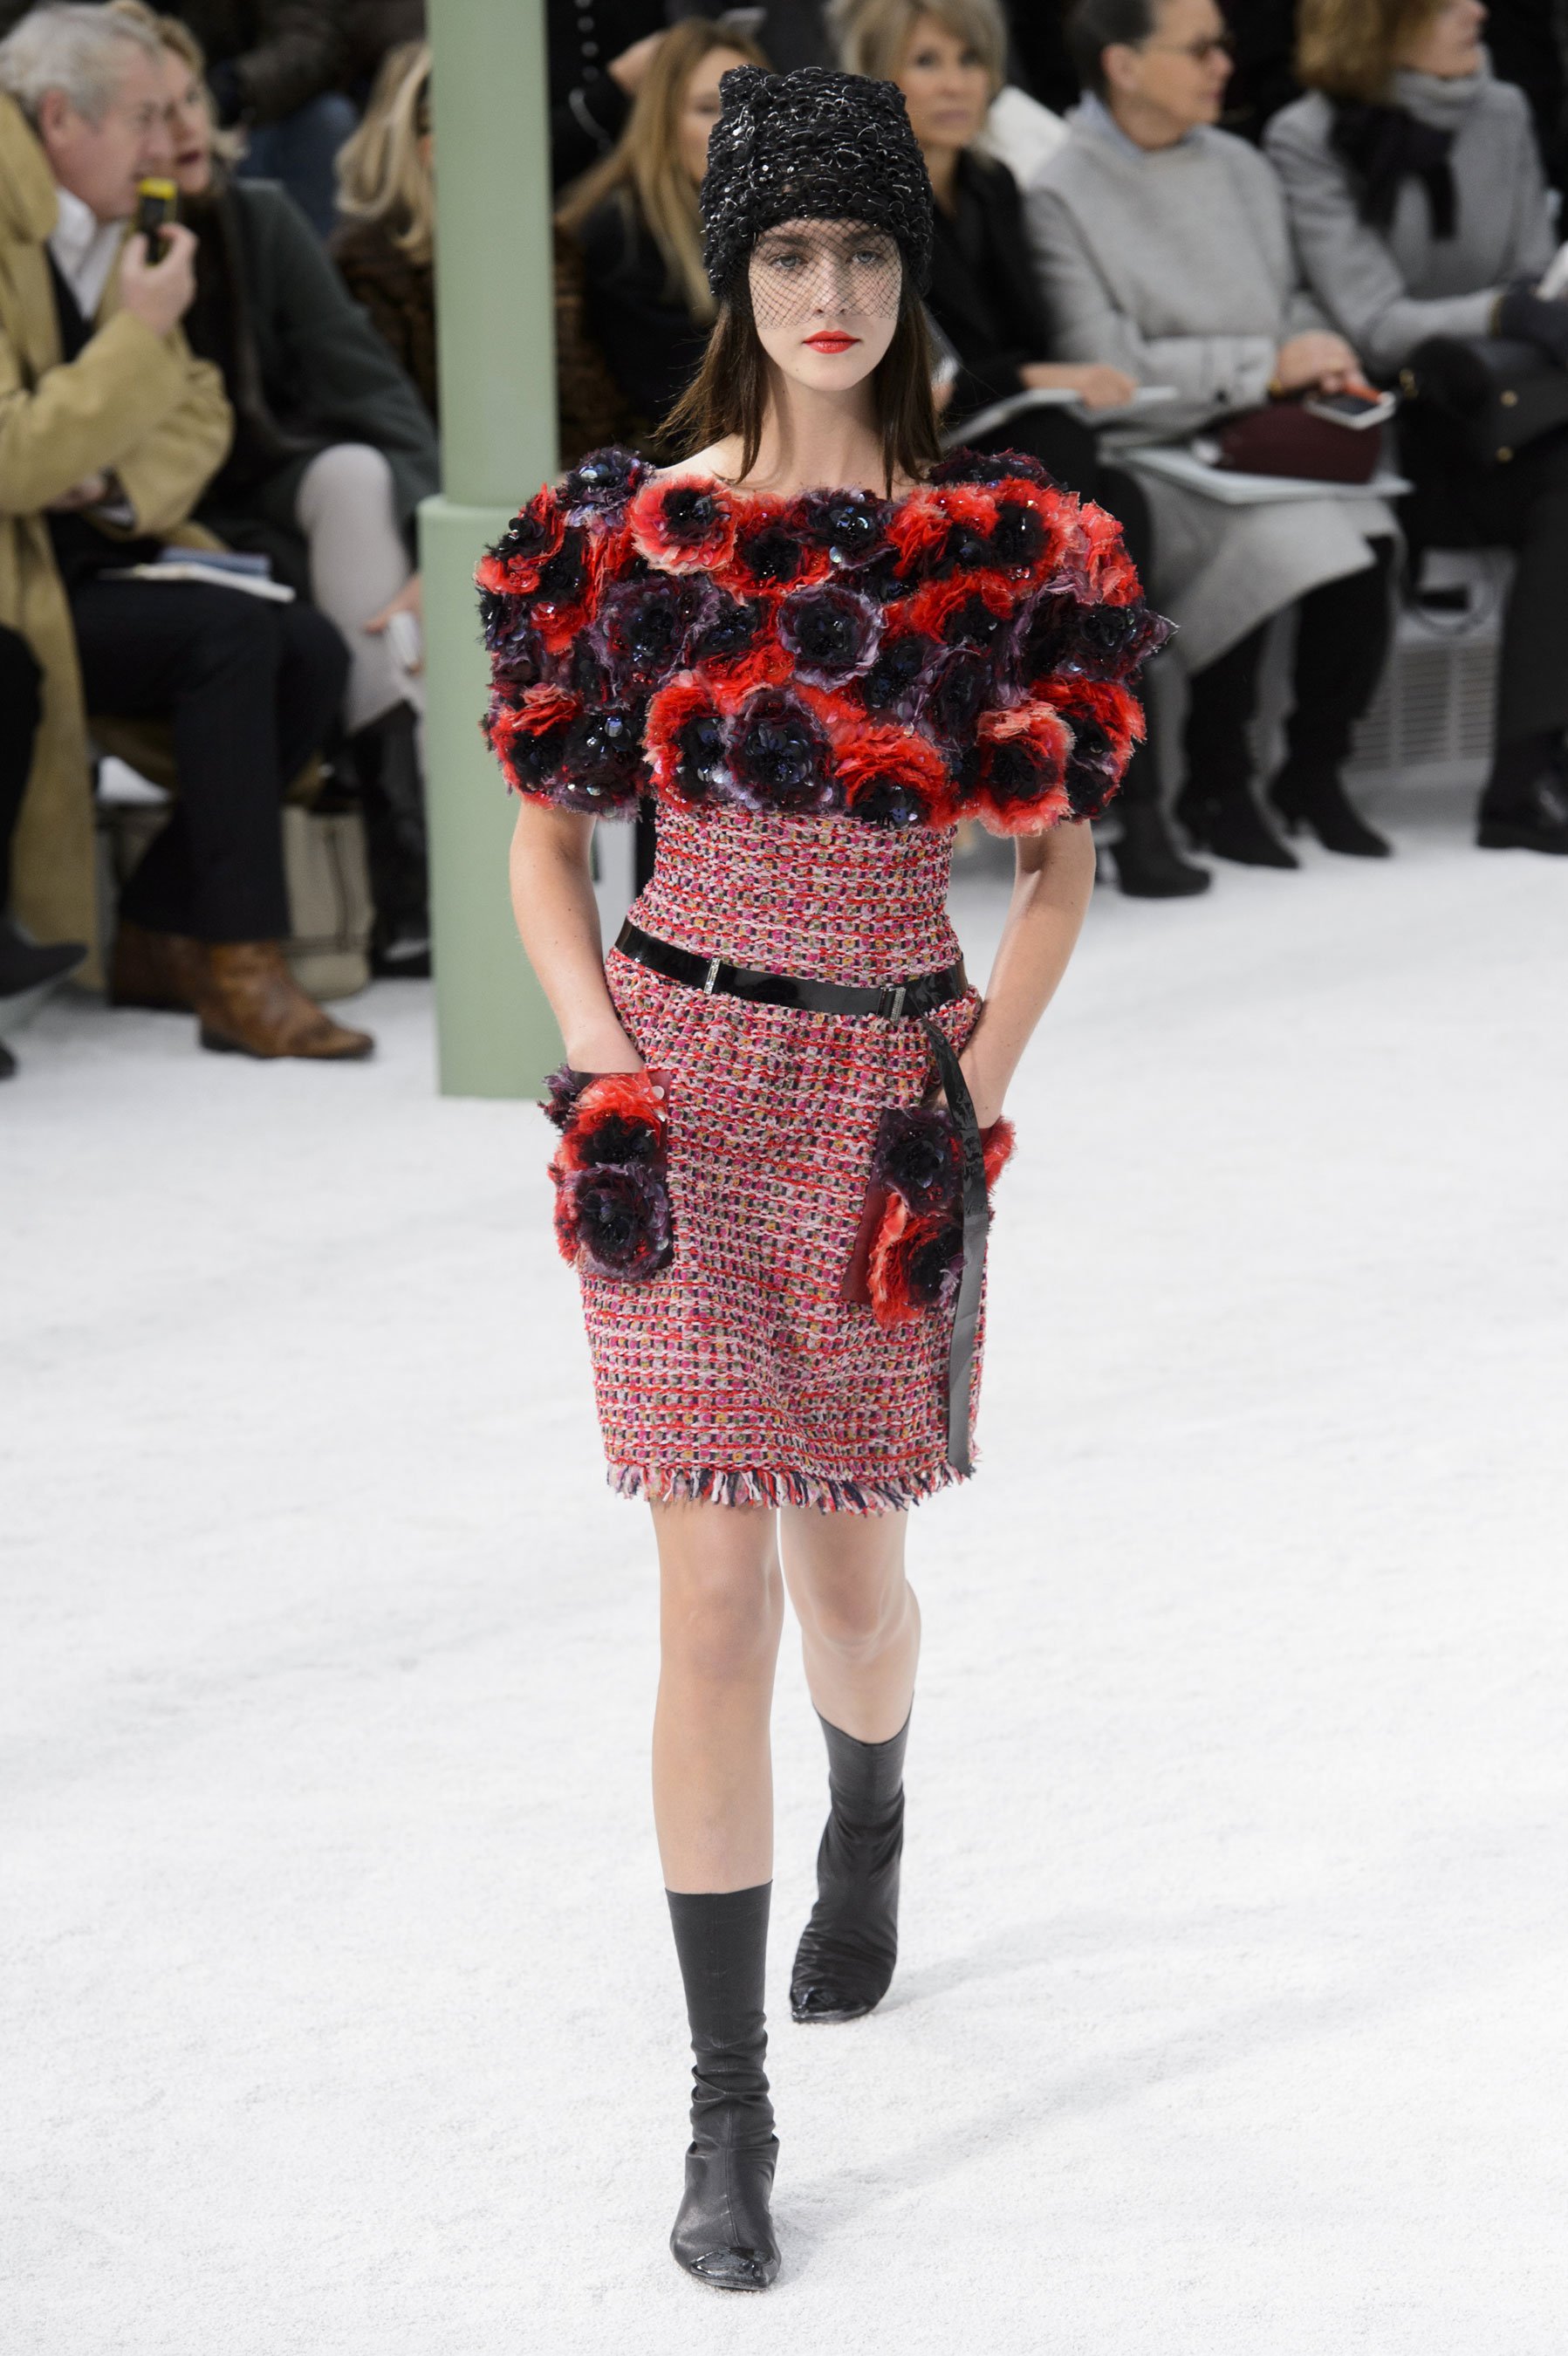 chanel haute couture spring 2015 pfw 41 christ